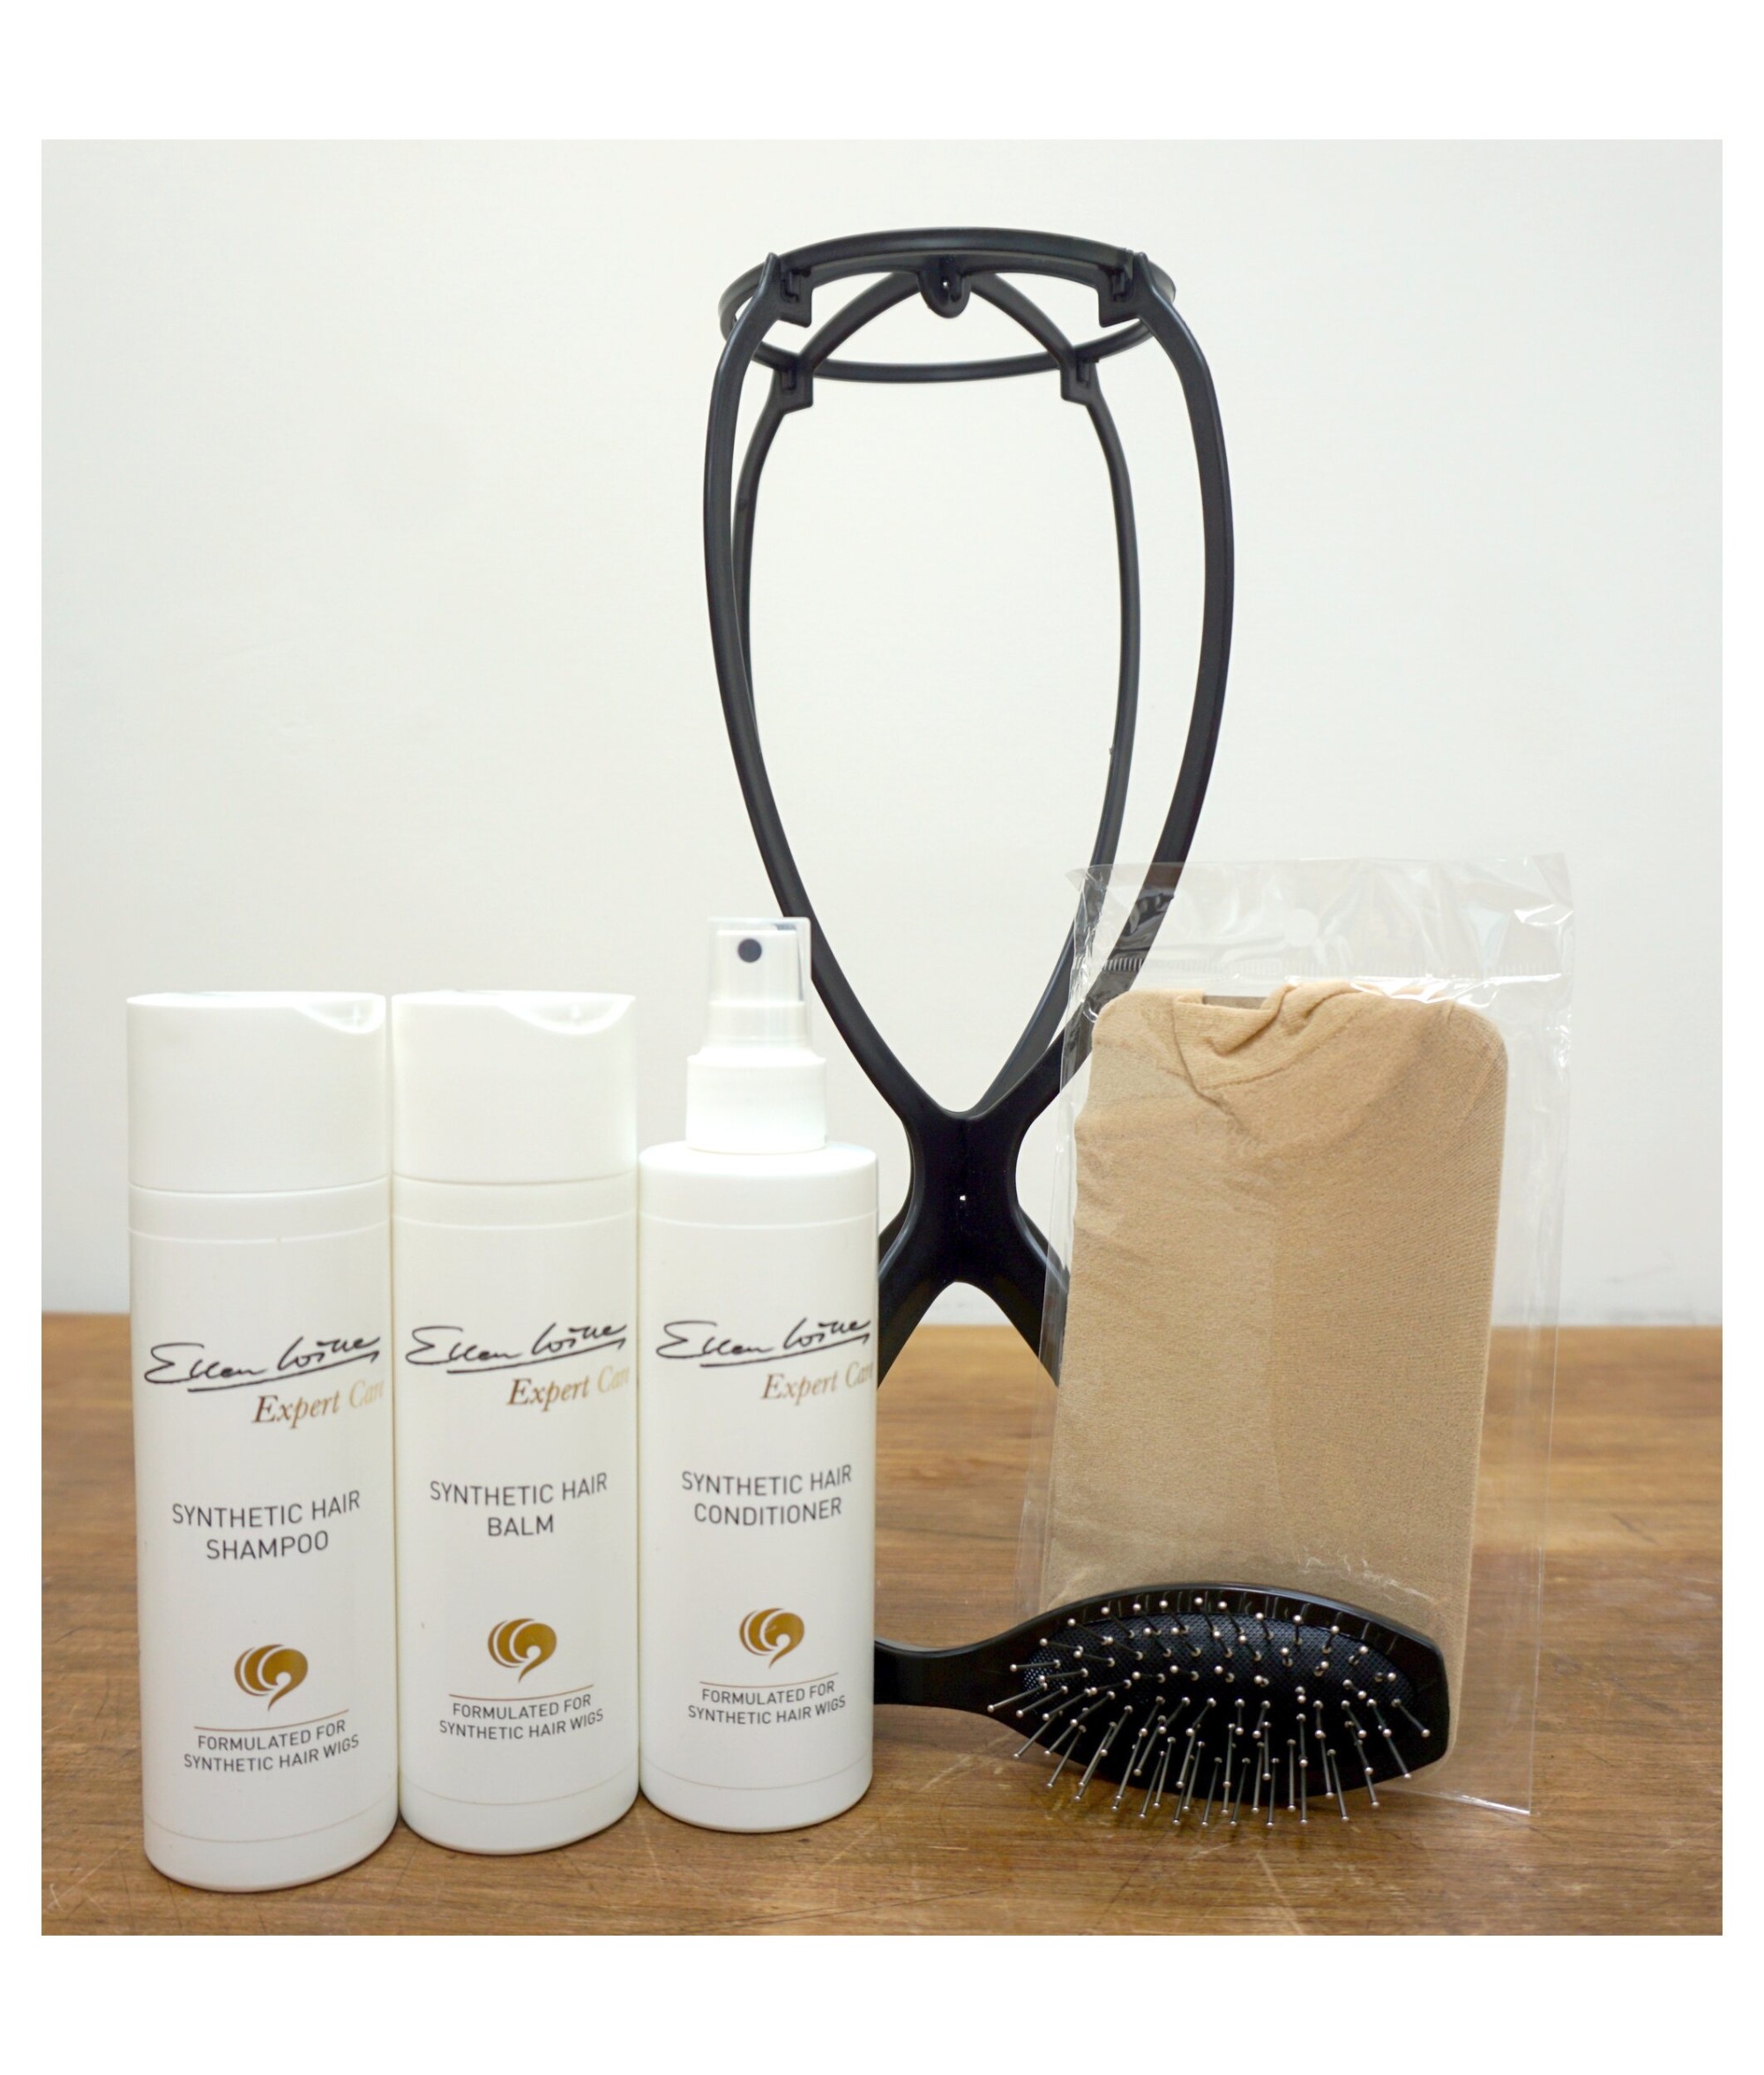 Human Hair Wig Deluxe Care Kit | Cancer Research UK Online Shop